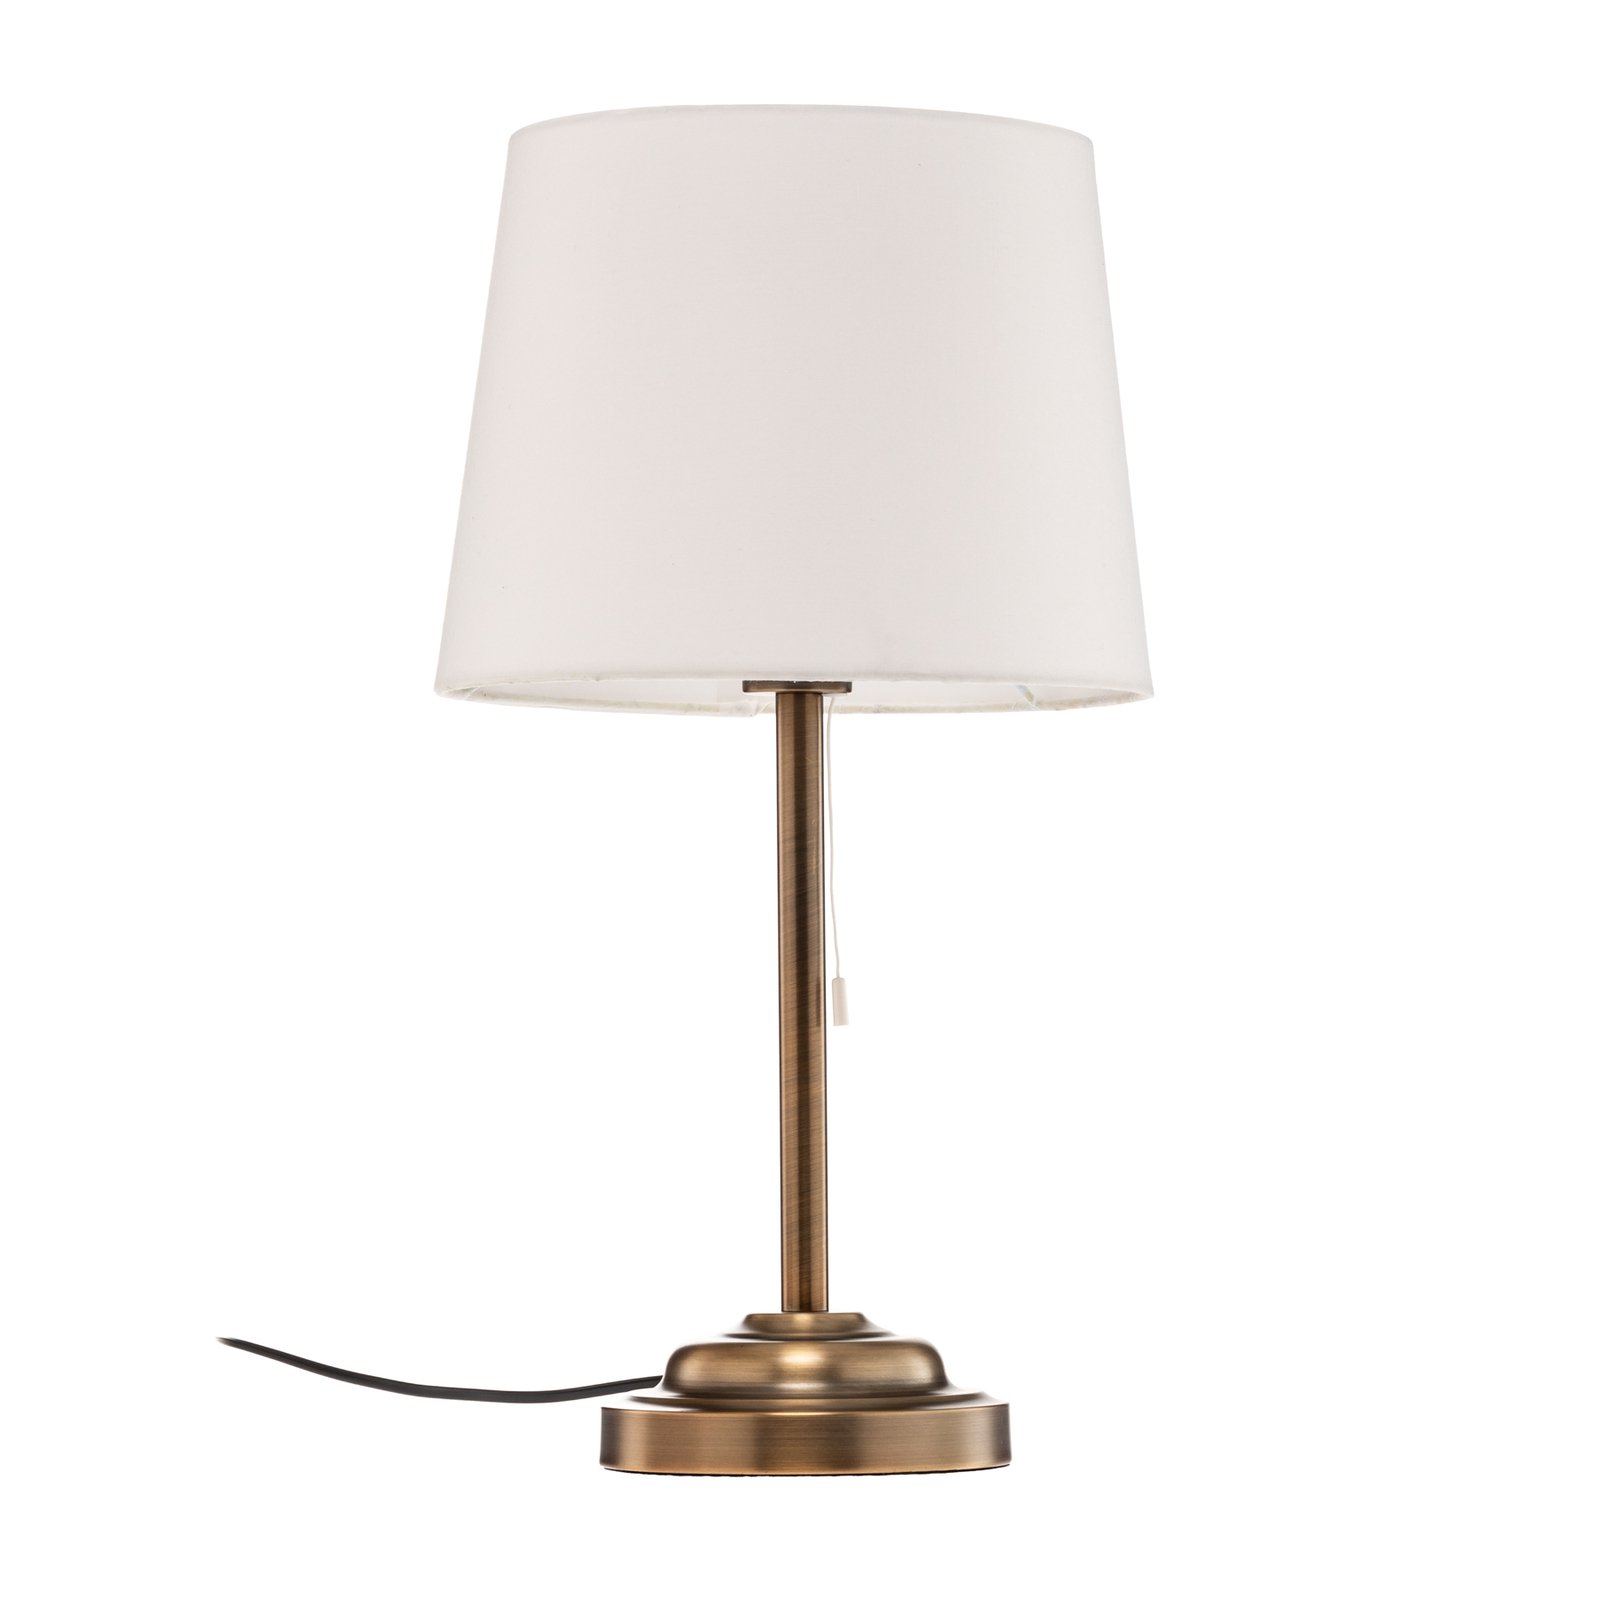 Lindby Alomira table lamp, 52 cm, brass